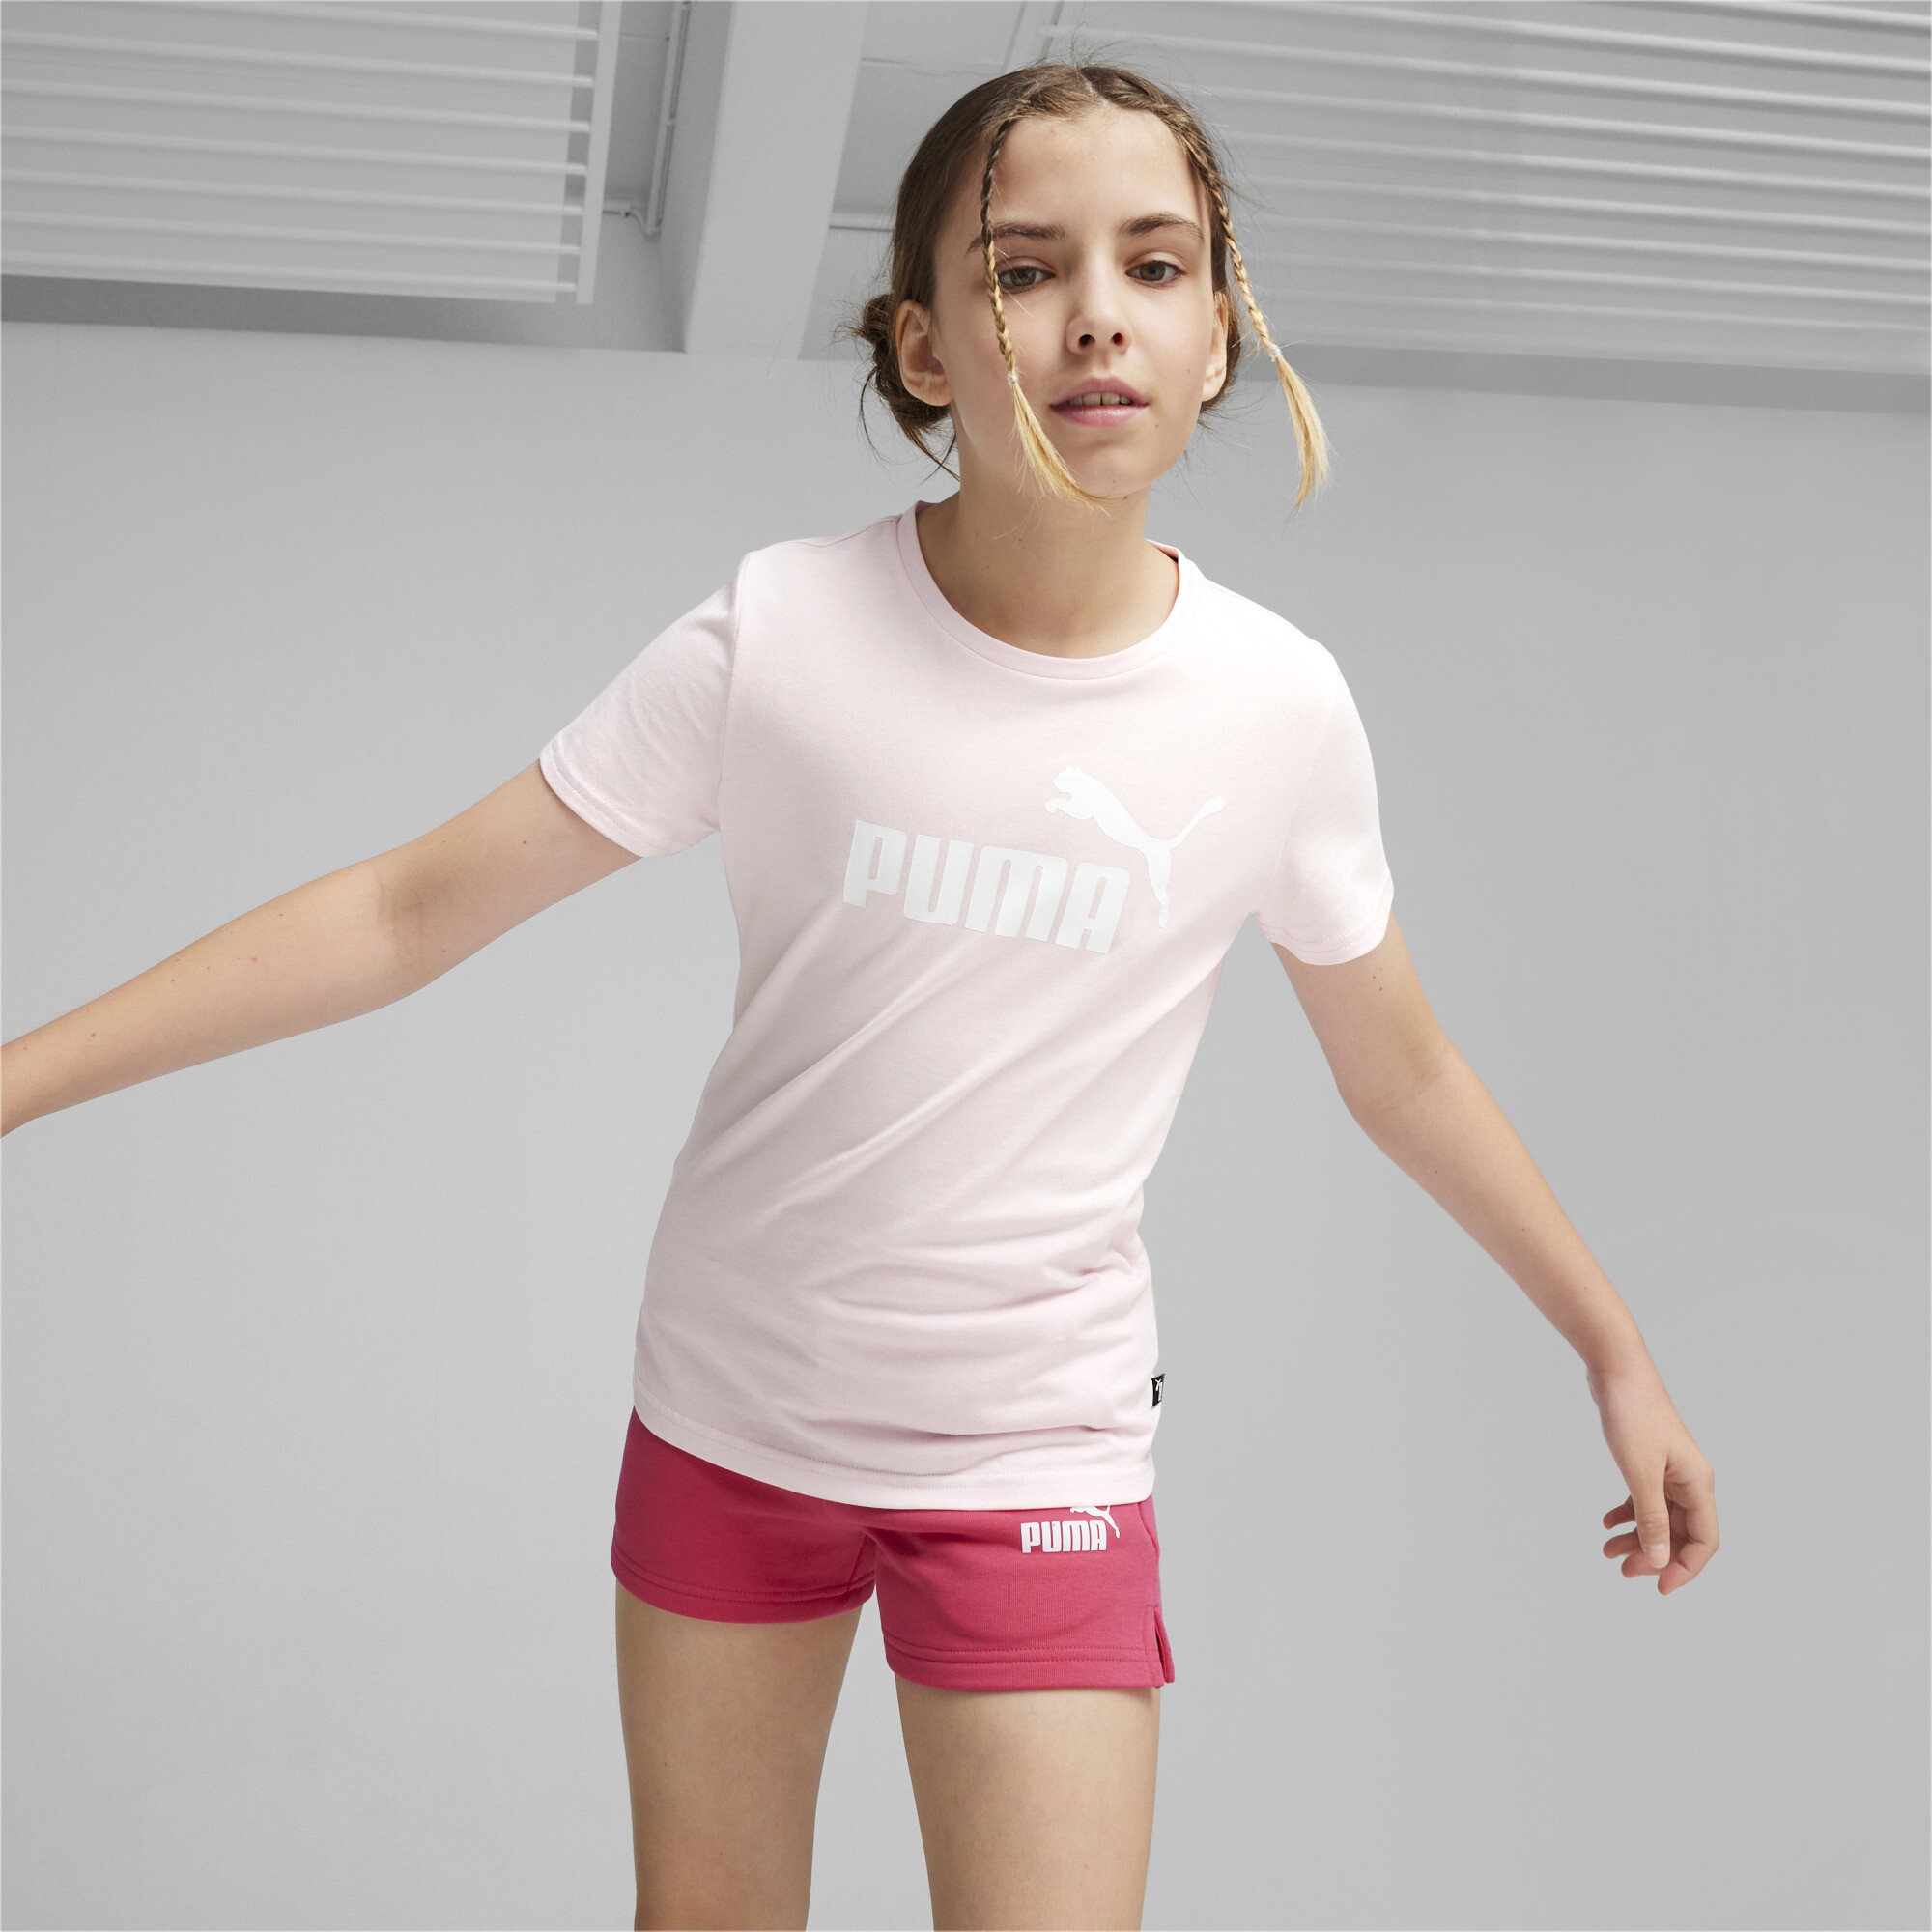 Women's Puma Logo Tee And Shorts Youth Set, Pink, Size 4-5Y, Clothing